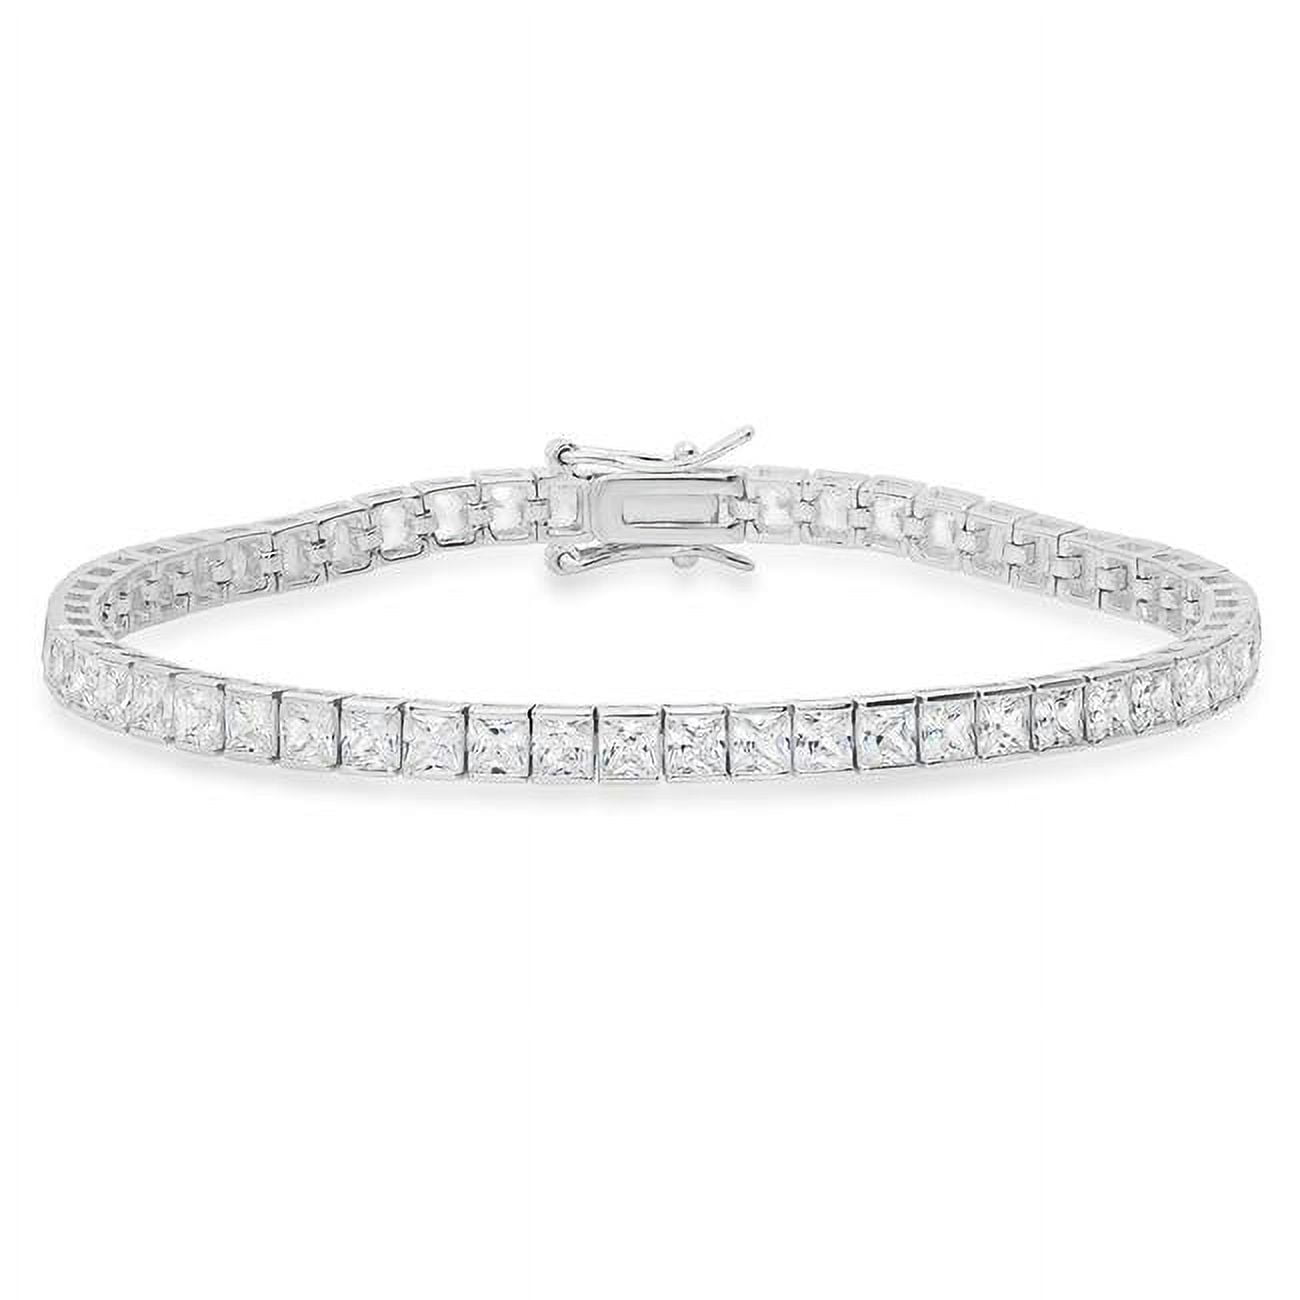 Picture of 212 Main 02-005-DSB 7.25 in. Sterling Silver Princess-Cut Cubic Zirconia Tennis Bracelet